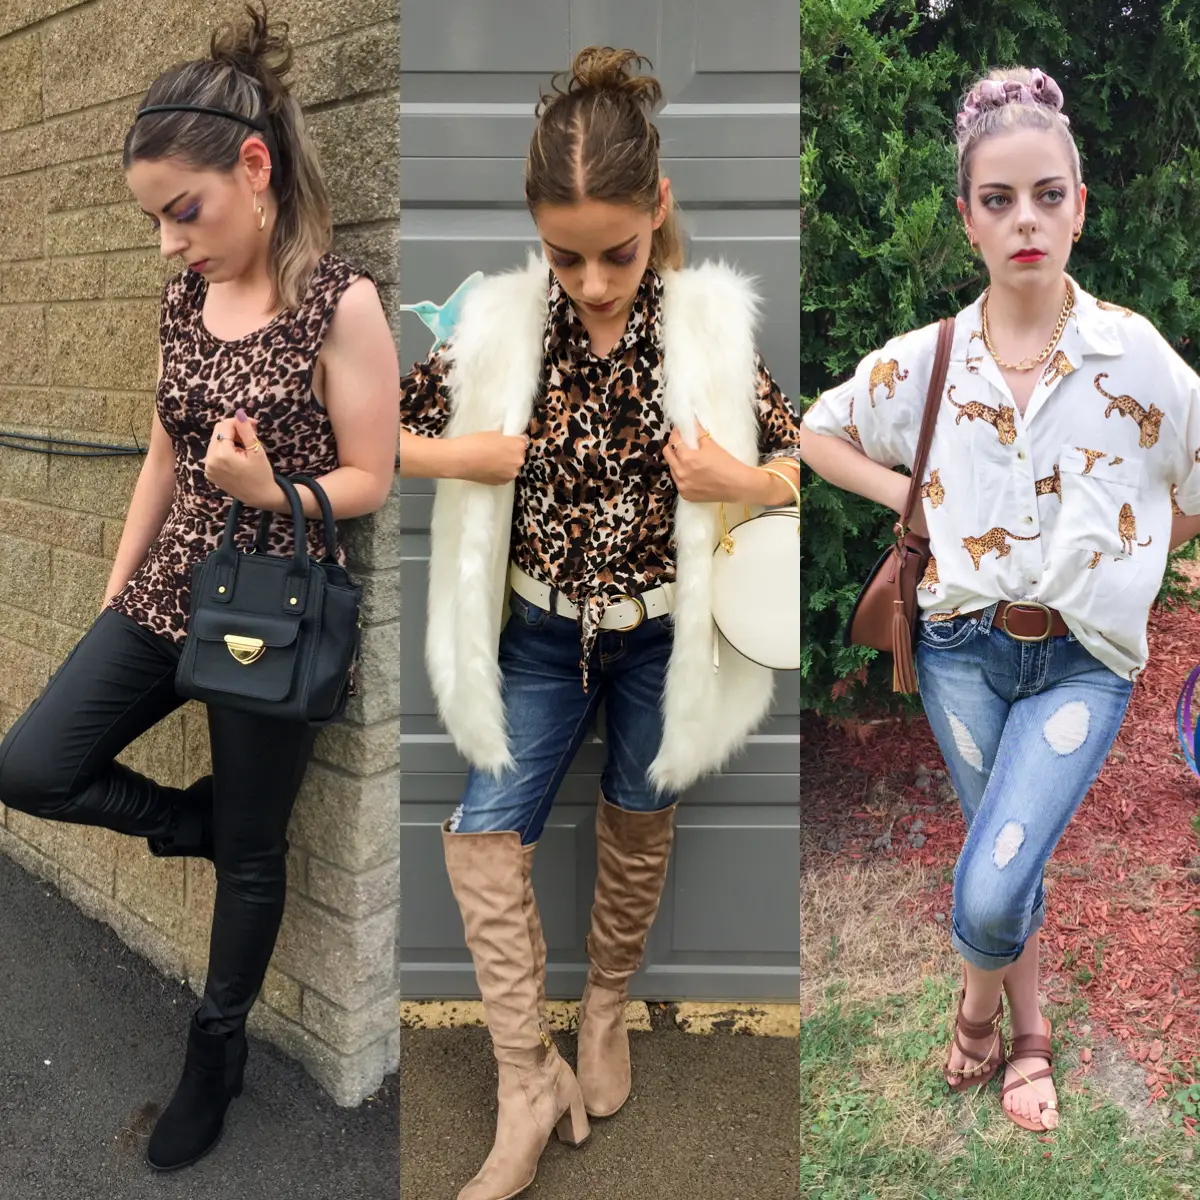 Brown Leopard Leather Belt with Leather Pumps Outfits (2 ideas & outfits)